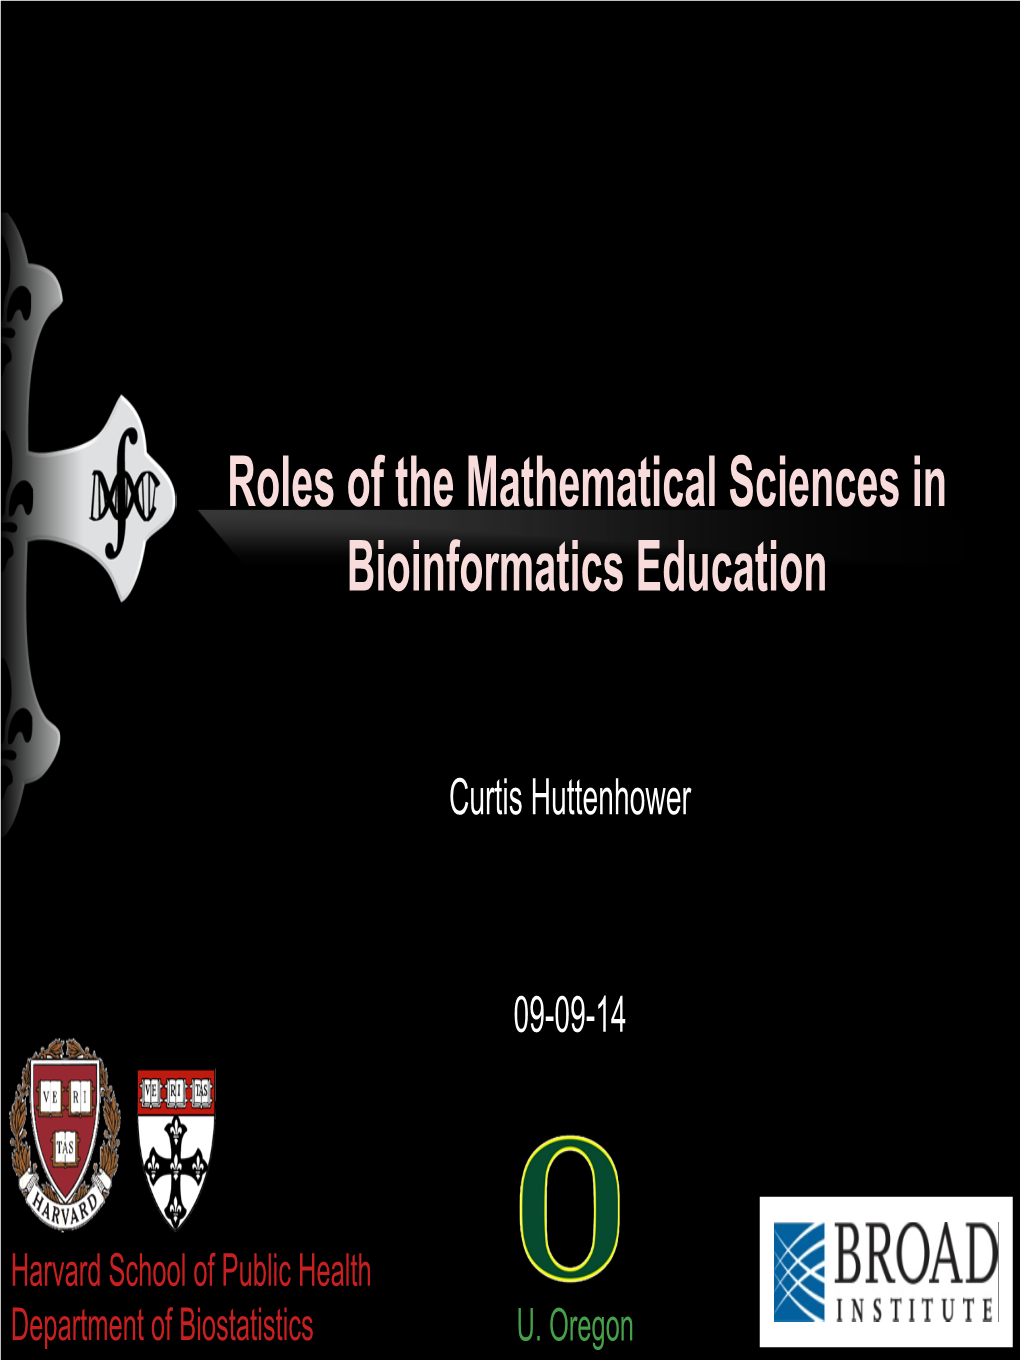 Roles of the Mathematical Sciences in Bioinformatics Education